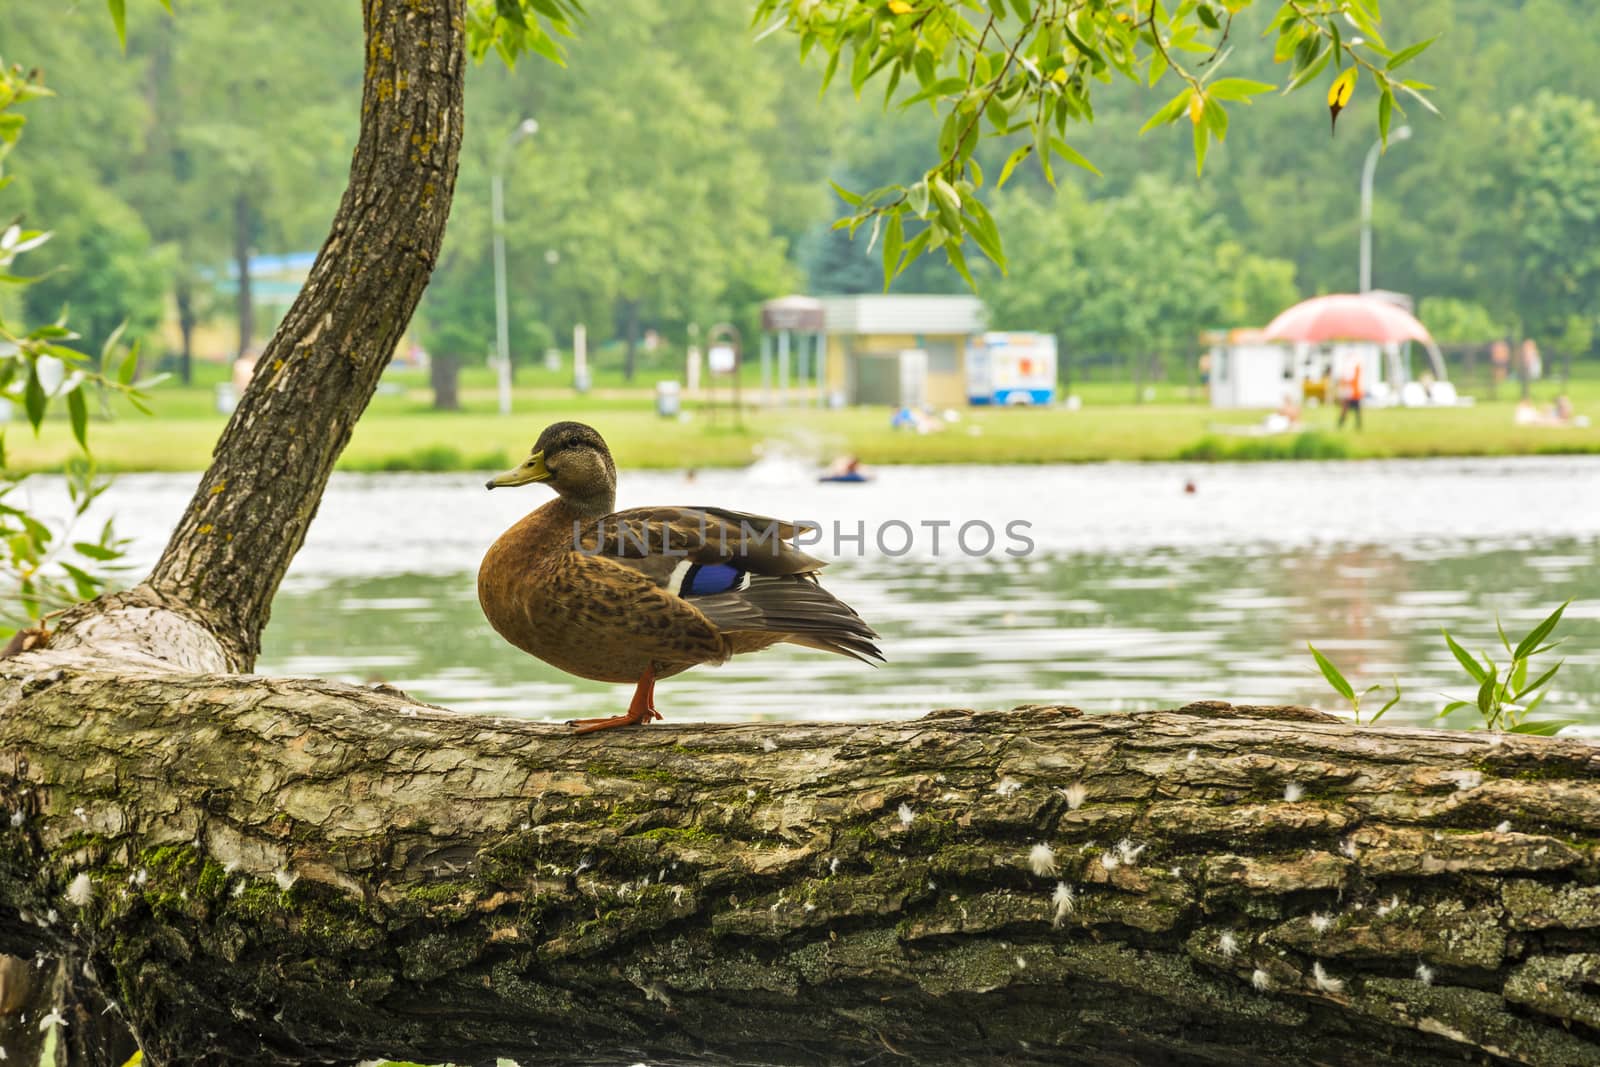 Wild duck standing on a tree bent over the body of water where people relax
